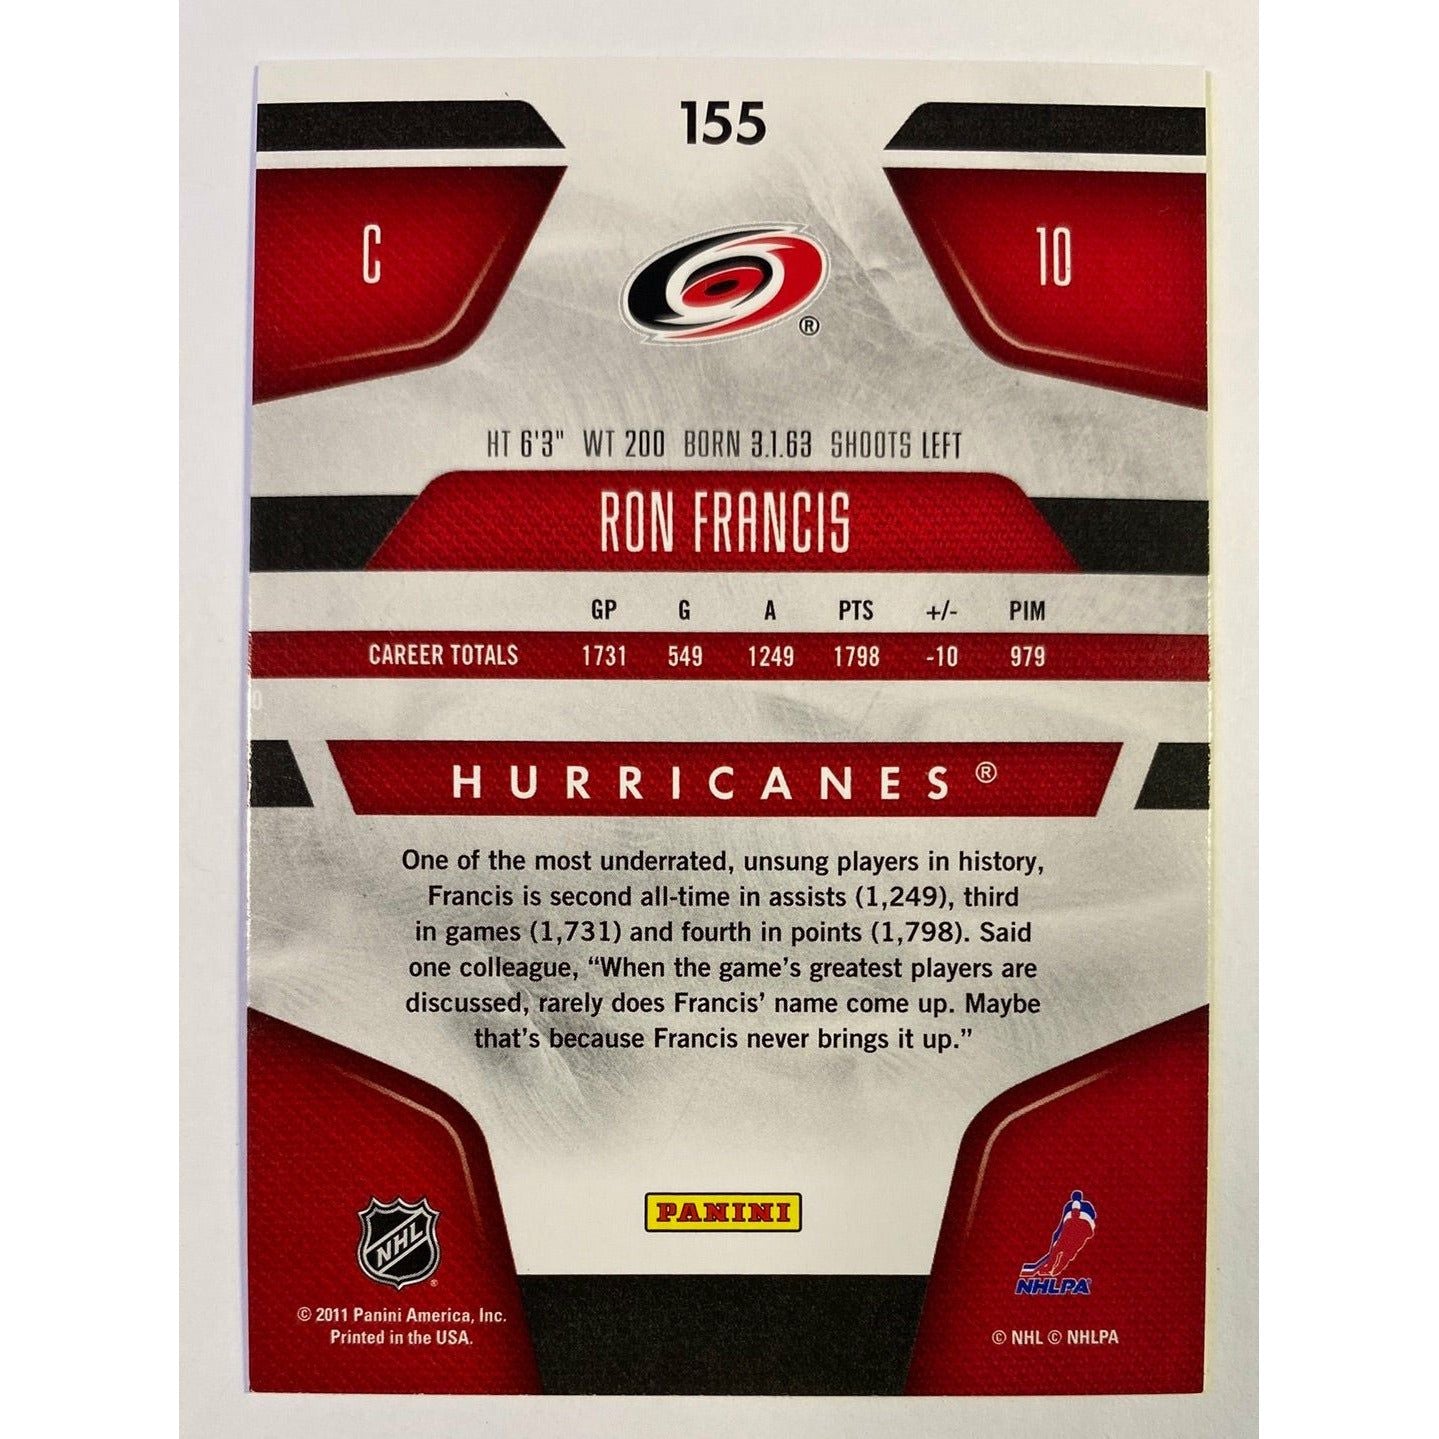 2011-12 Panini Certified Immortals Ron Francis